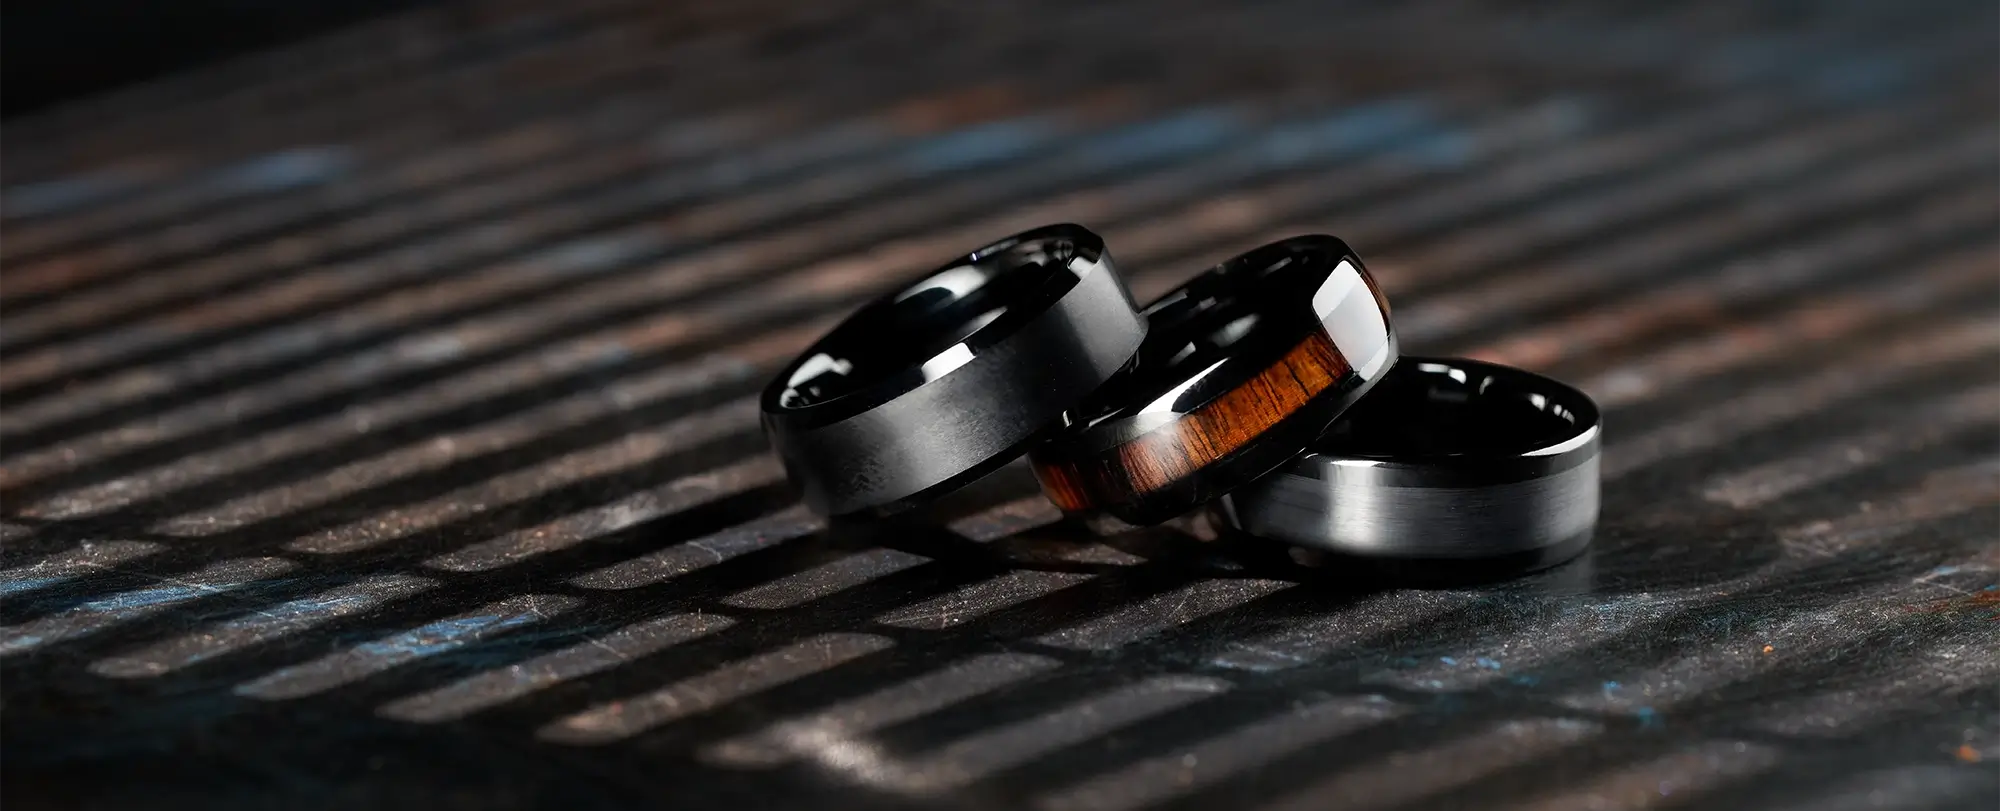 How to Pick a Wedding Band That Matches Your Engagement Ring – Lucce